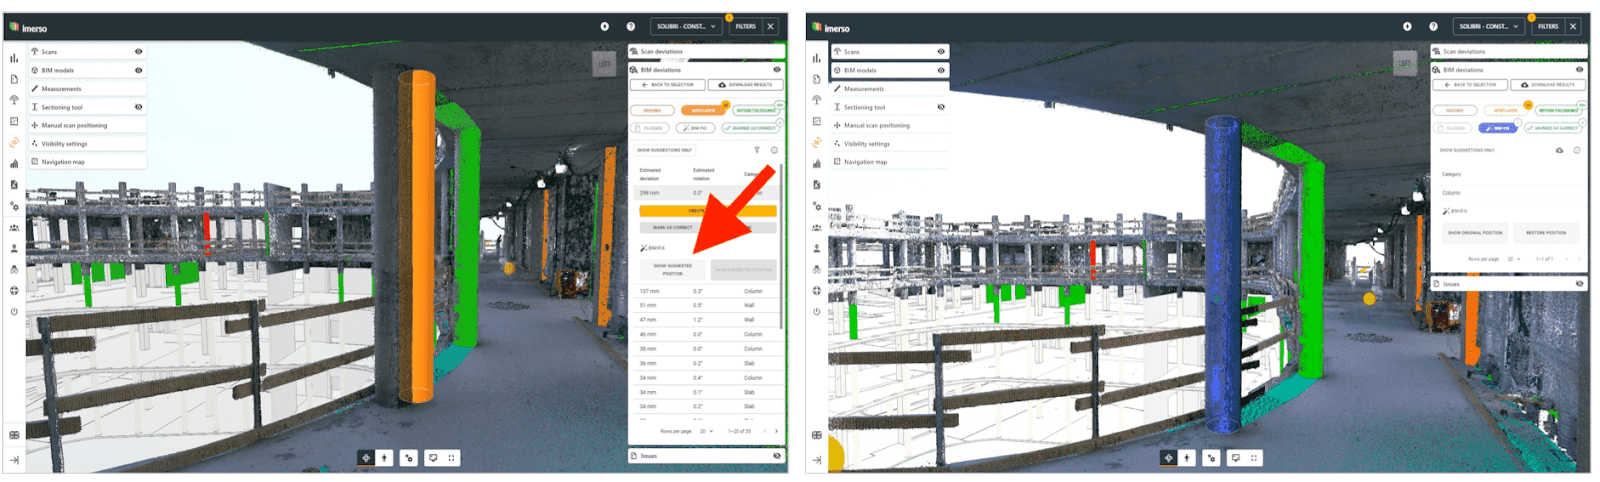 Image of a construction inspection: misplaced column on the left is automatically moved to As Built location in the right image, and ready to export.